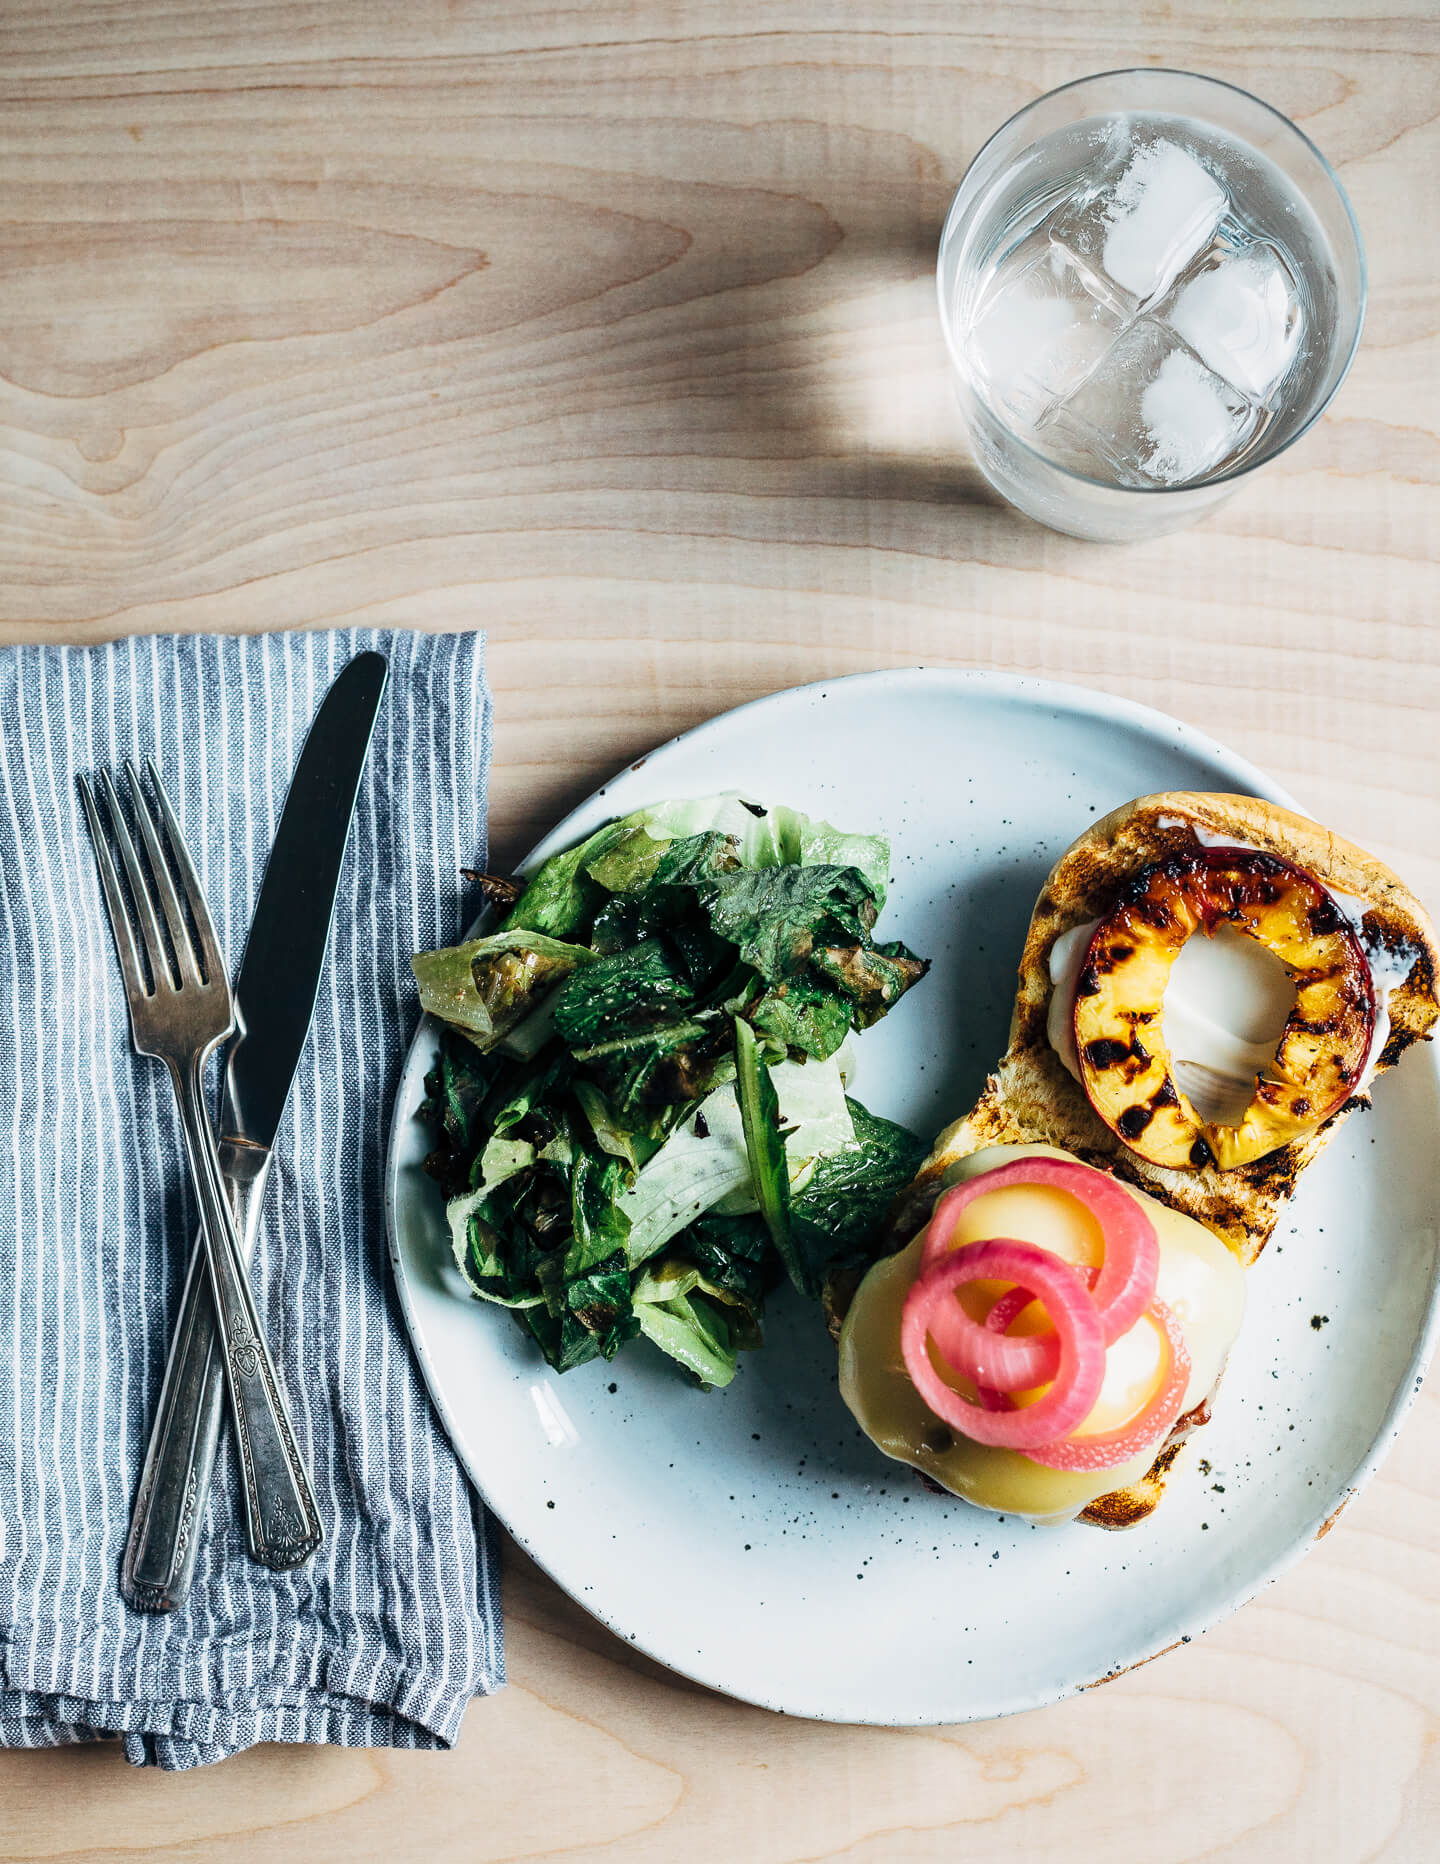 Juicy pork burgers perfectly grilled and topped with velvety melted Raclette cheese, grilled nectarine slices, crisp pickled red onions, and a smear of mayo.